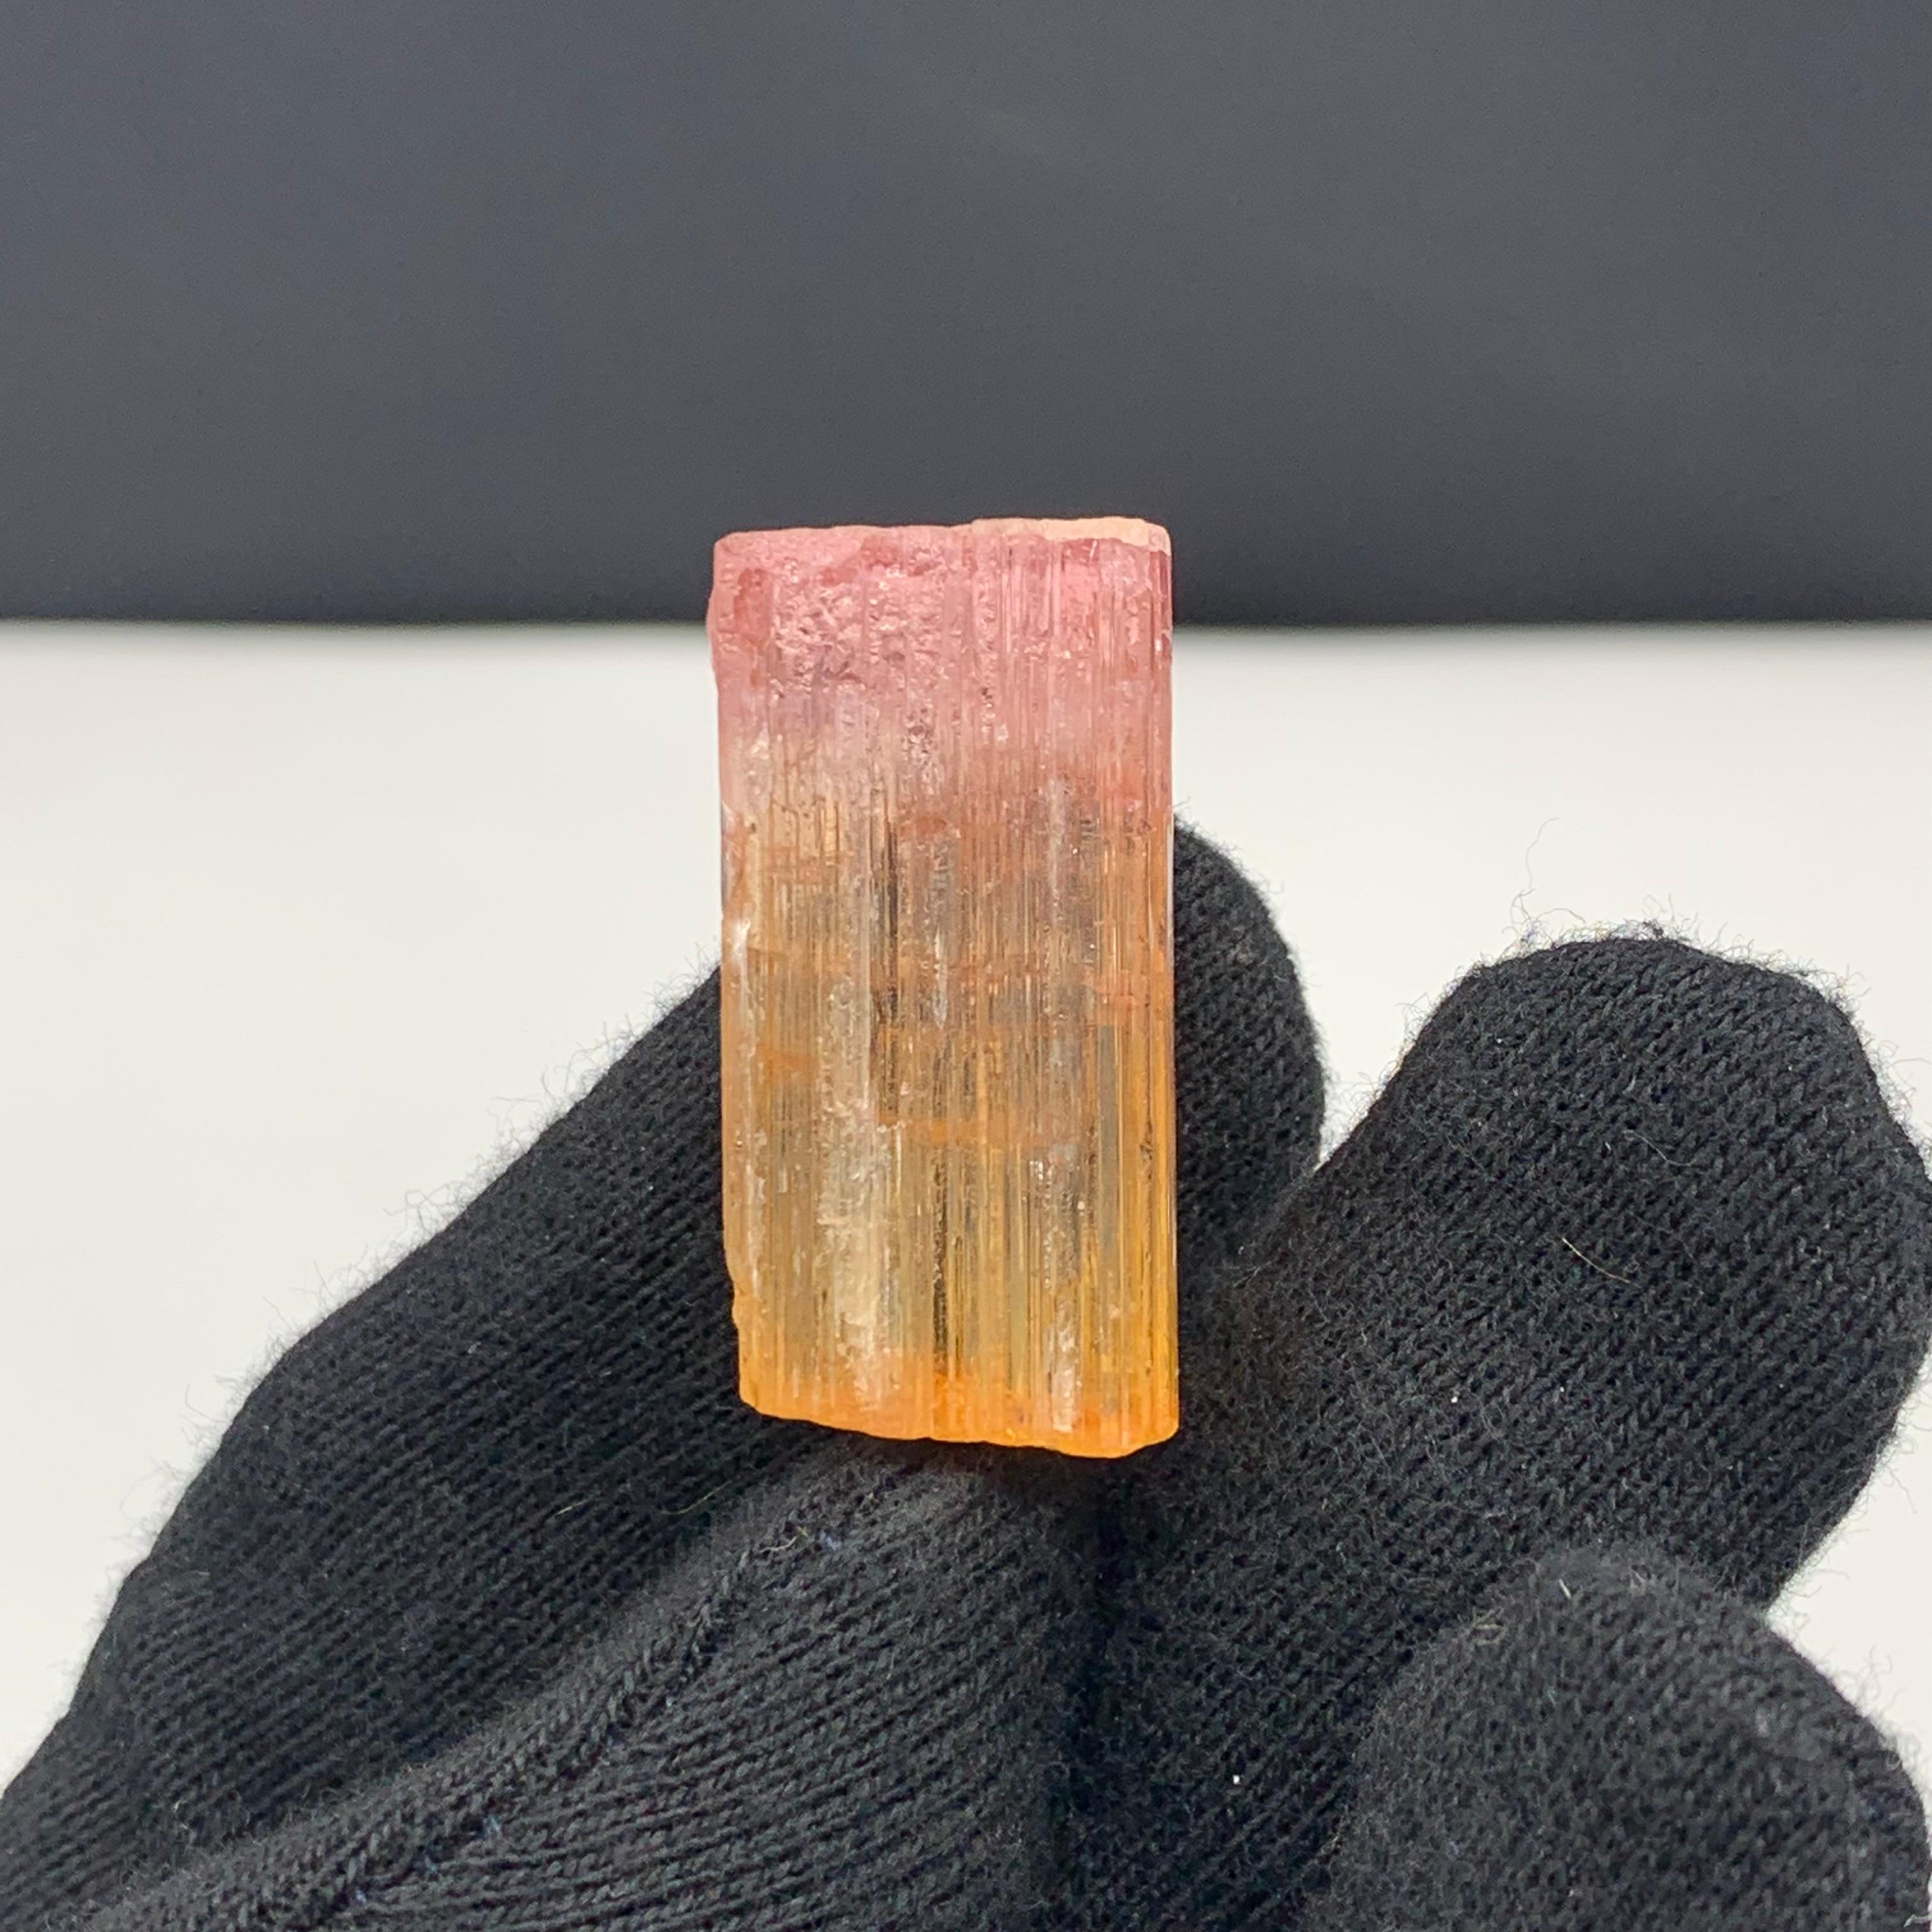 48 Carat Amazing Bi Color Tourmaline Crystal From Paprook Mine, Afghanistan

Weight: 48Carat 
Dimension: 3.2 x 1.6 x 0.7 Cm
Origin : Paprook Mine, Afghanistan 
Color: Pink and Orange 

Tourmaline is a crystalline silicate mineral group in which